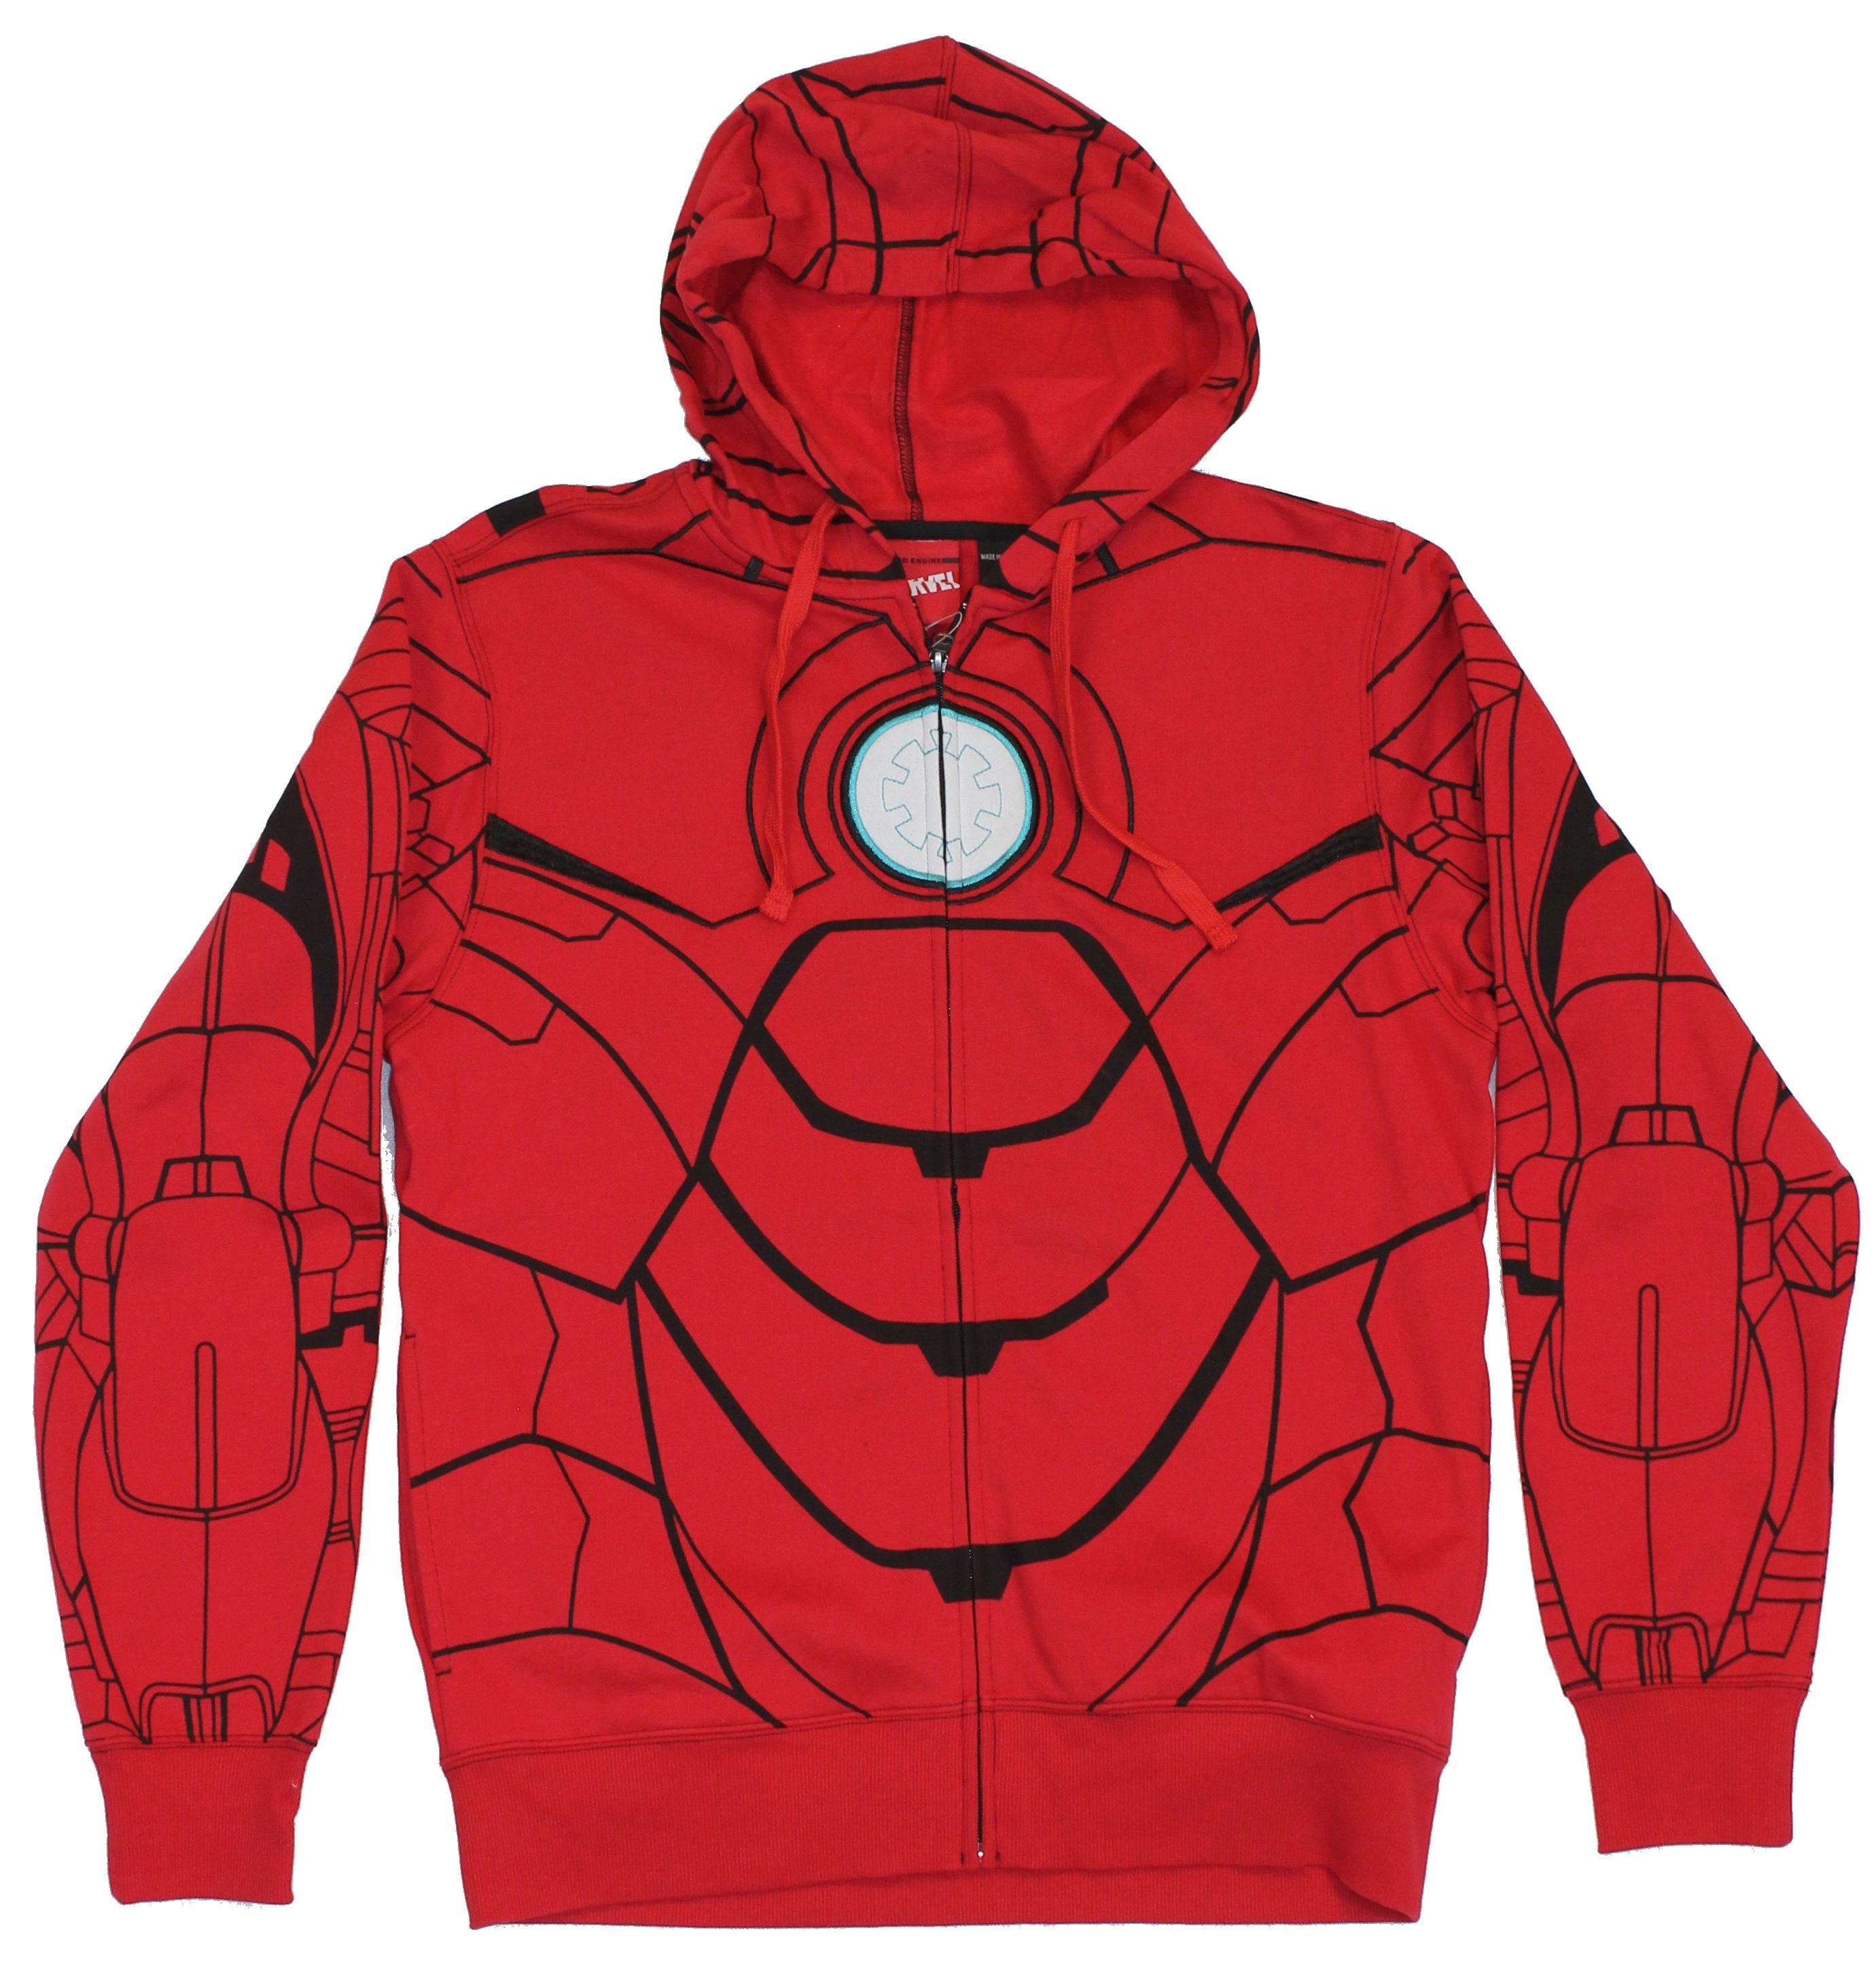 Marvel Iron Man Costume Hoodie New with Tags Officially Licensed 